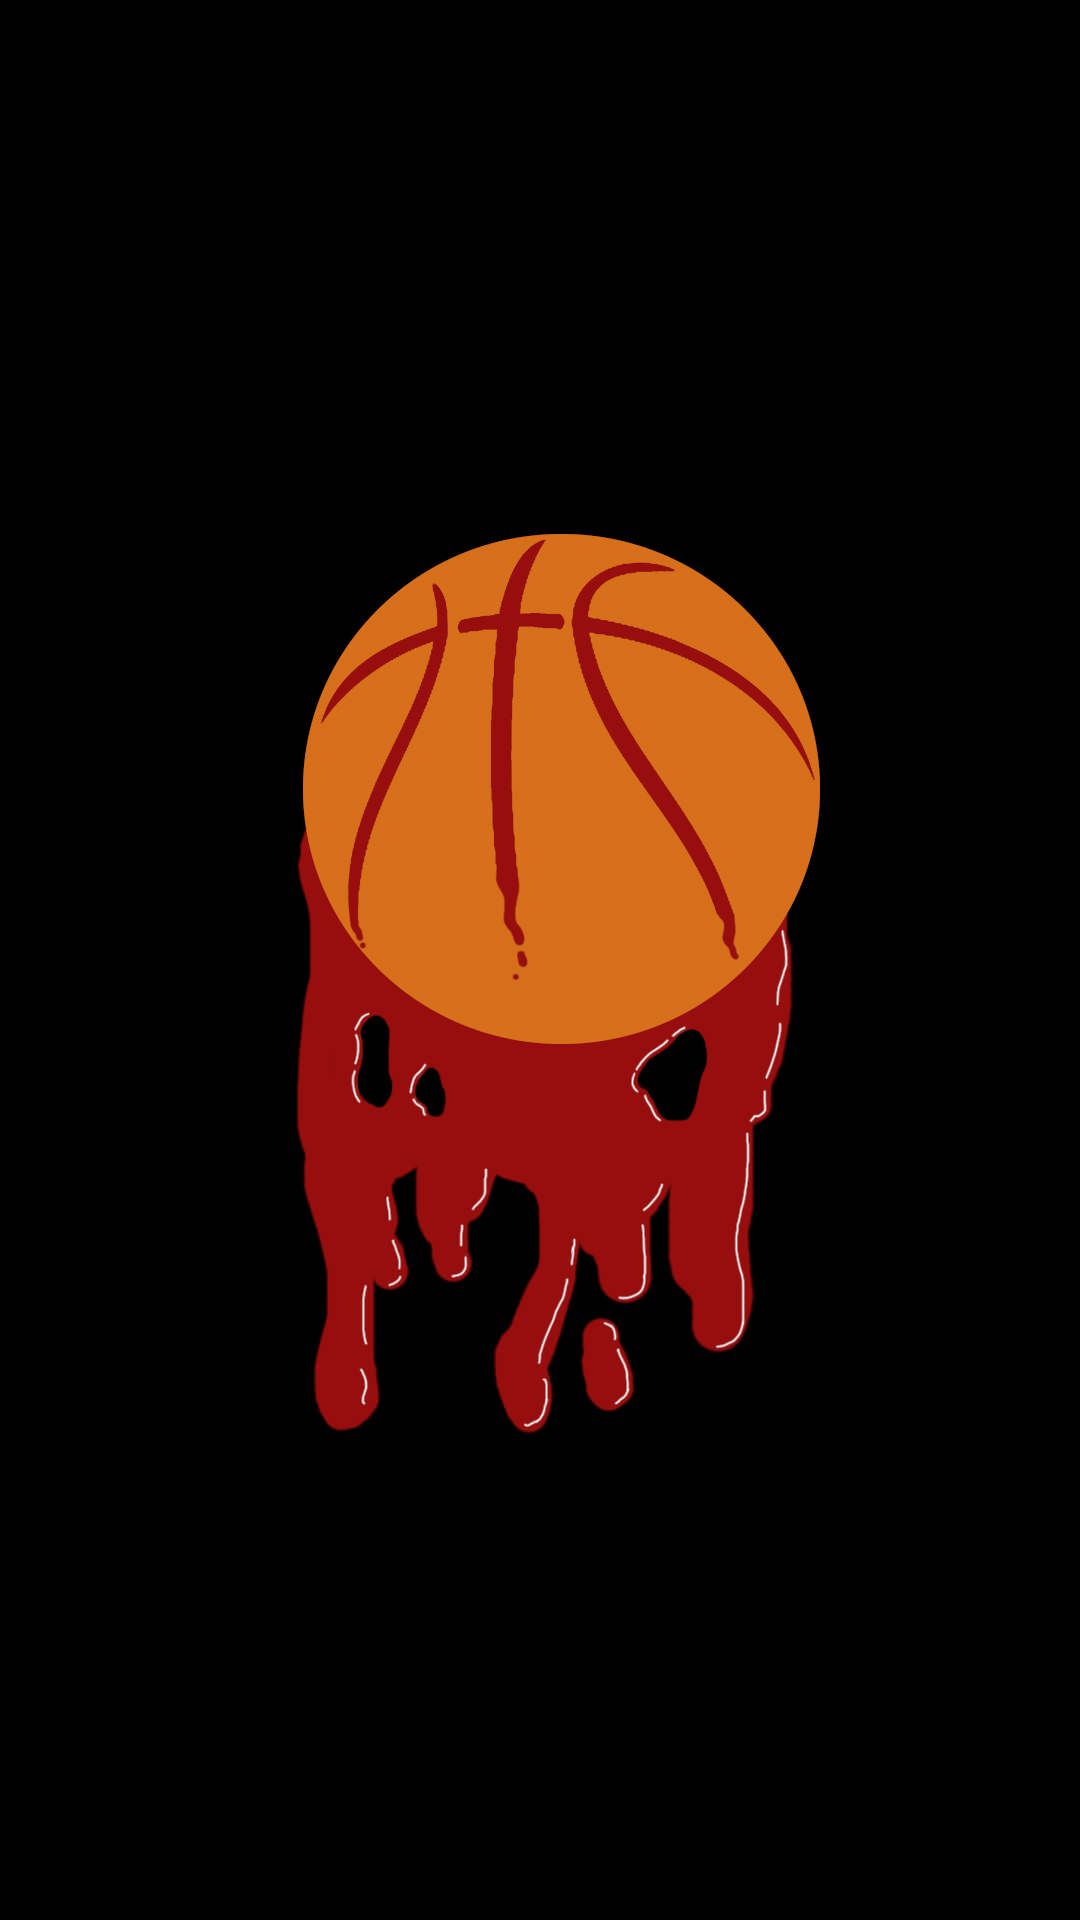 Basketball blood drip iPhone 6 wallpapers